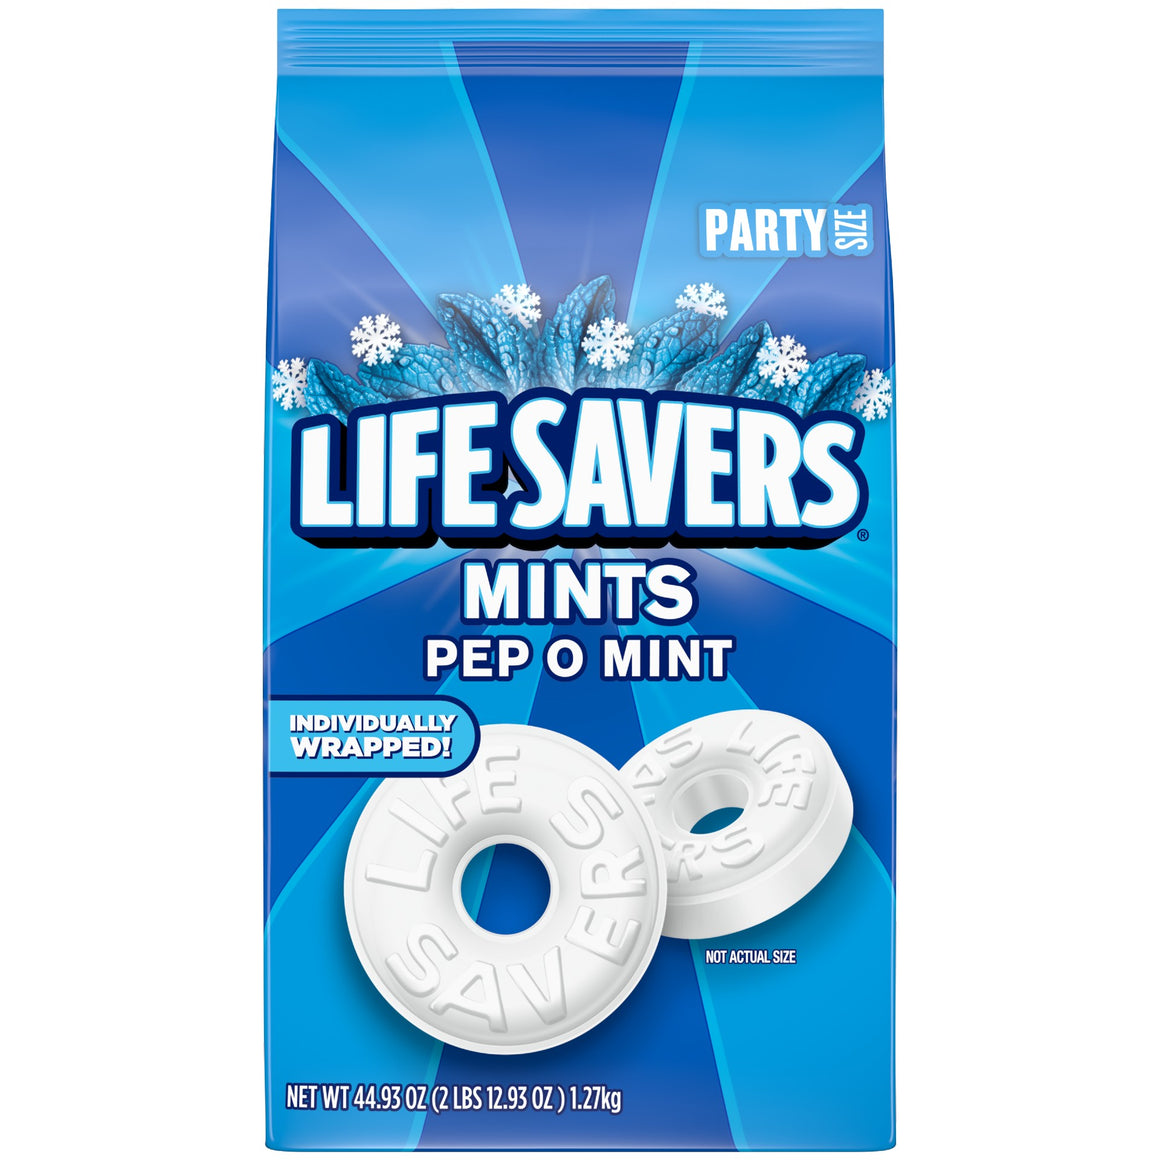 All City Candy Life Savers Mints Pep O Mint - Party Size Bags 44.93-oz Bag Bulk Wrapped Wrigley For fresh candy and great service, visit www.allcitycandy.com